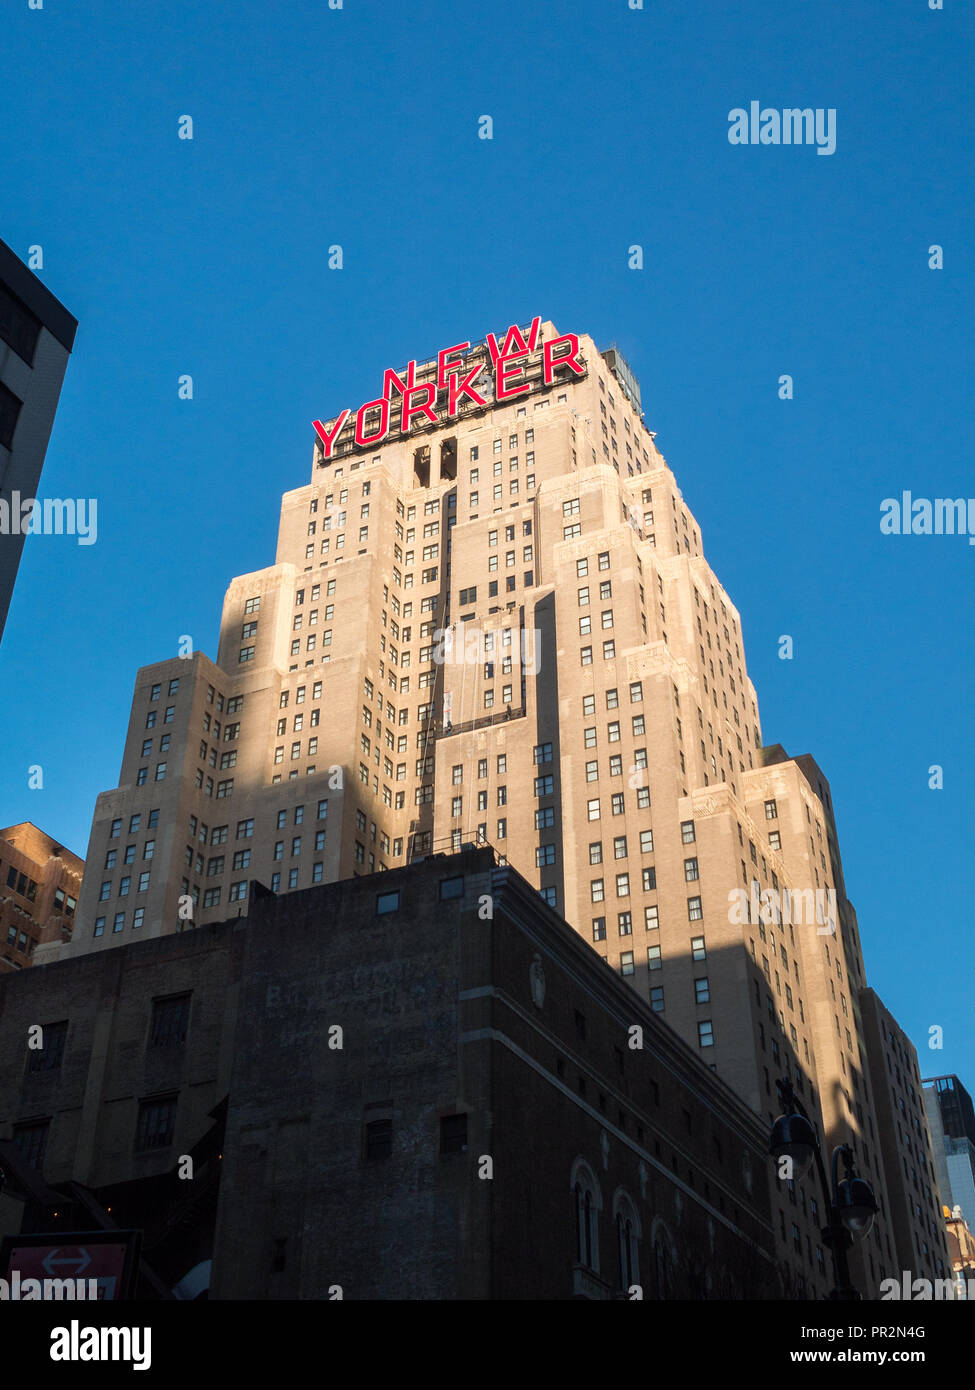 New Yorker Building, New York Banque D'Images